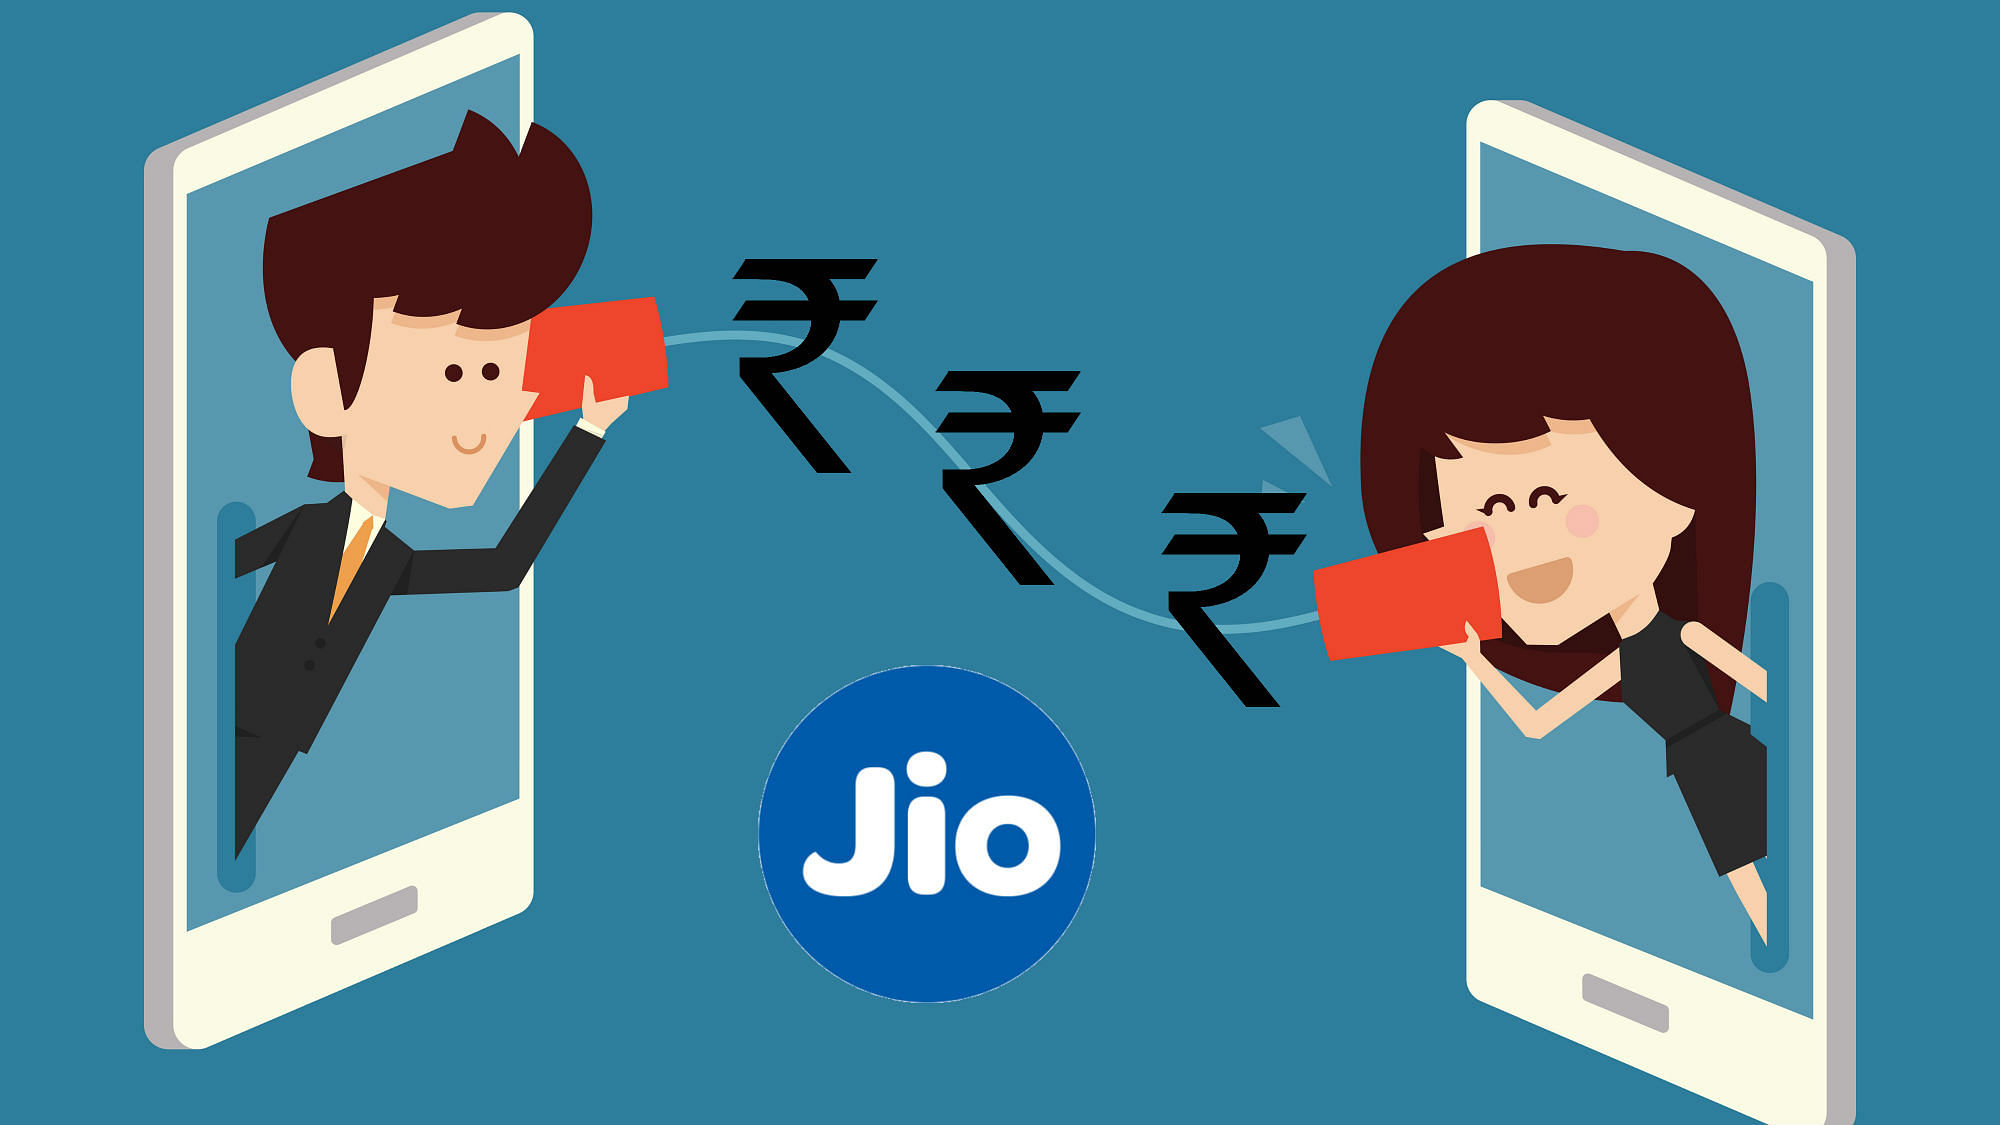 Jio is the leading  and the only profitable telecom player in the country right now.